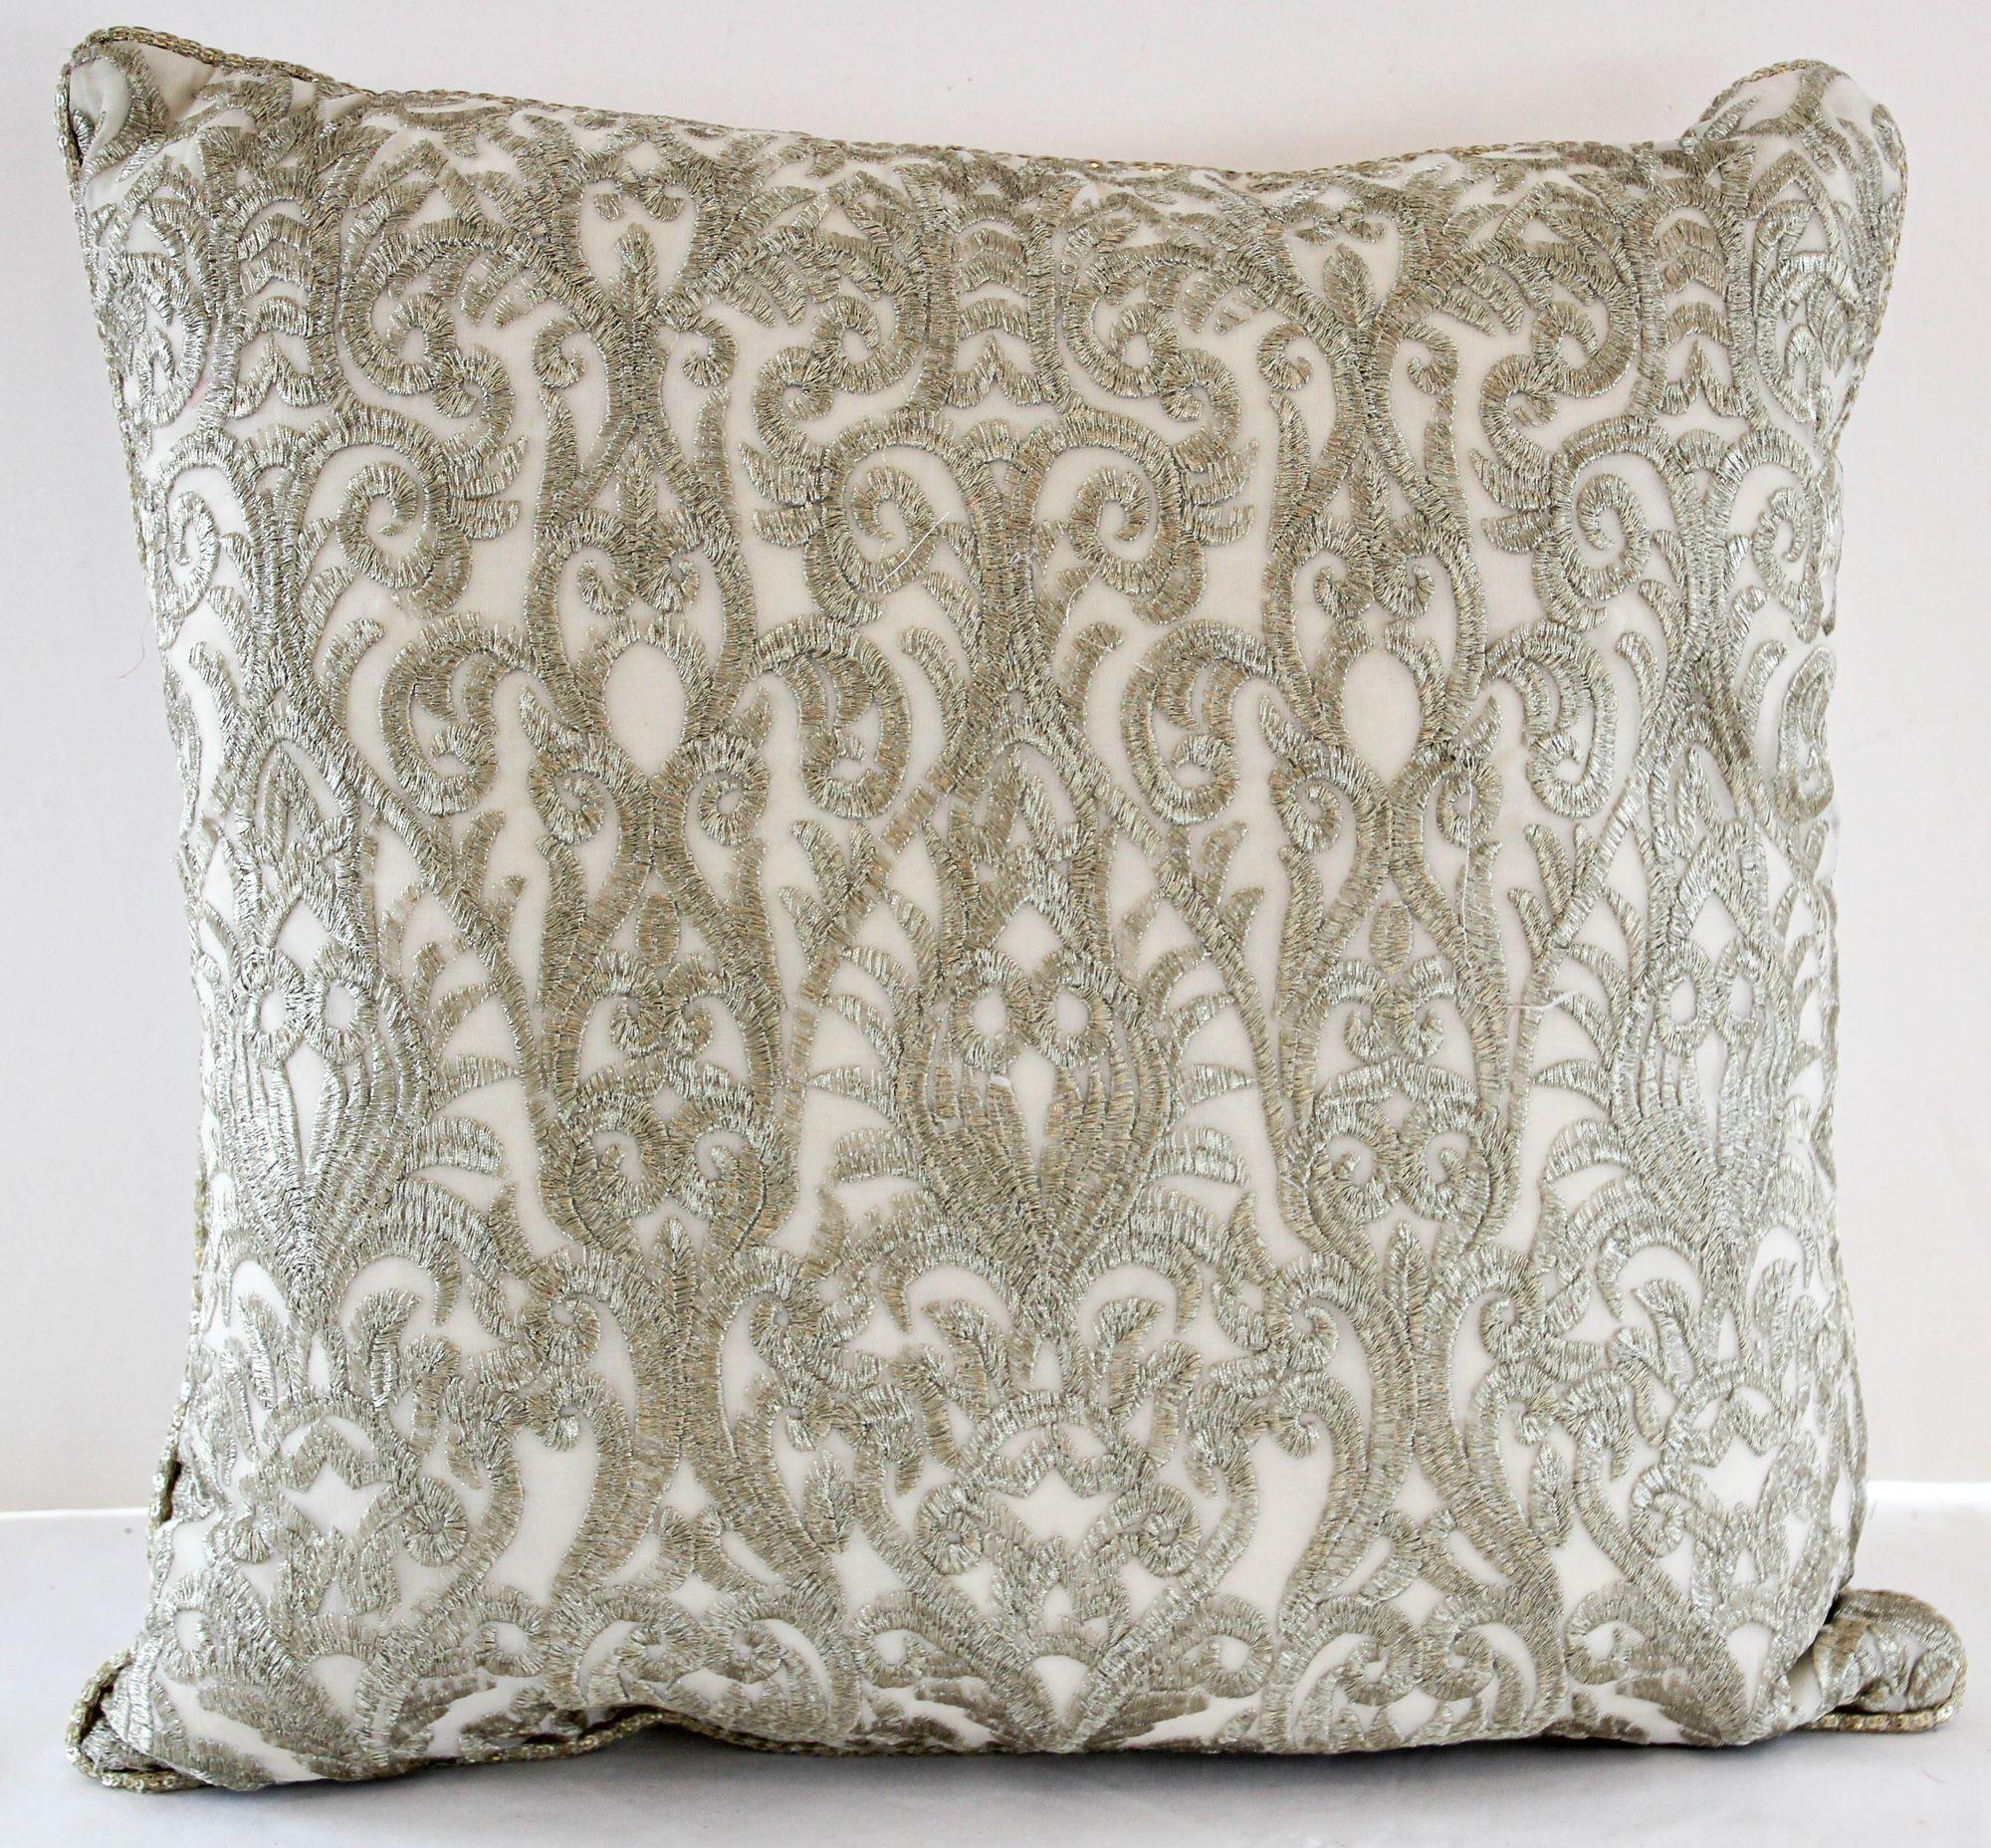 Turkish Moorish Ottoman Style Throw Pillow with Silver Metallic Embroidery  For Sale at 1stDibs